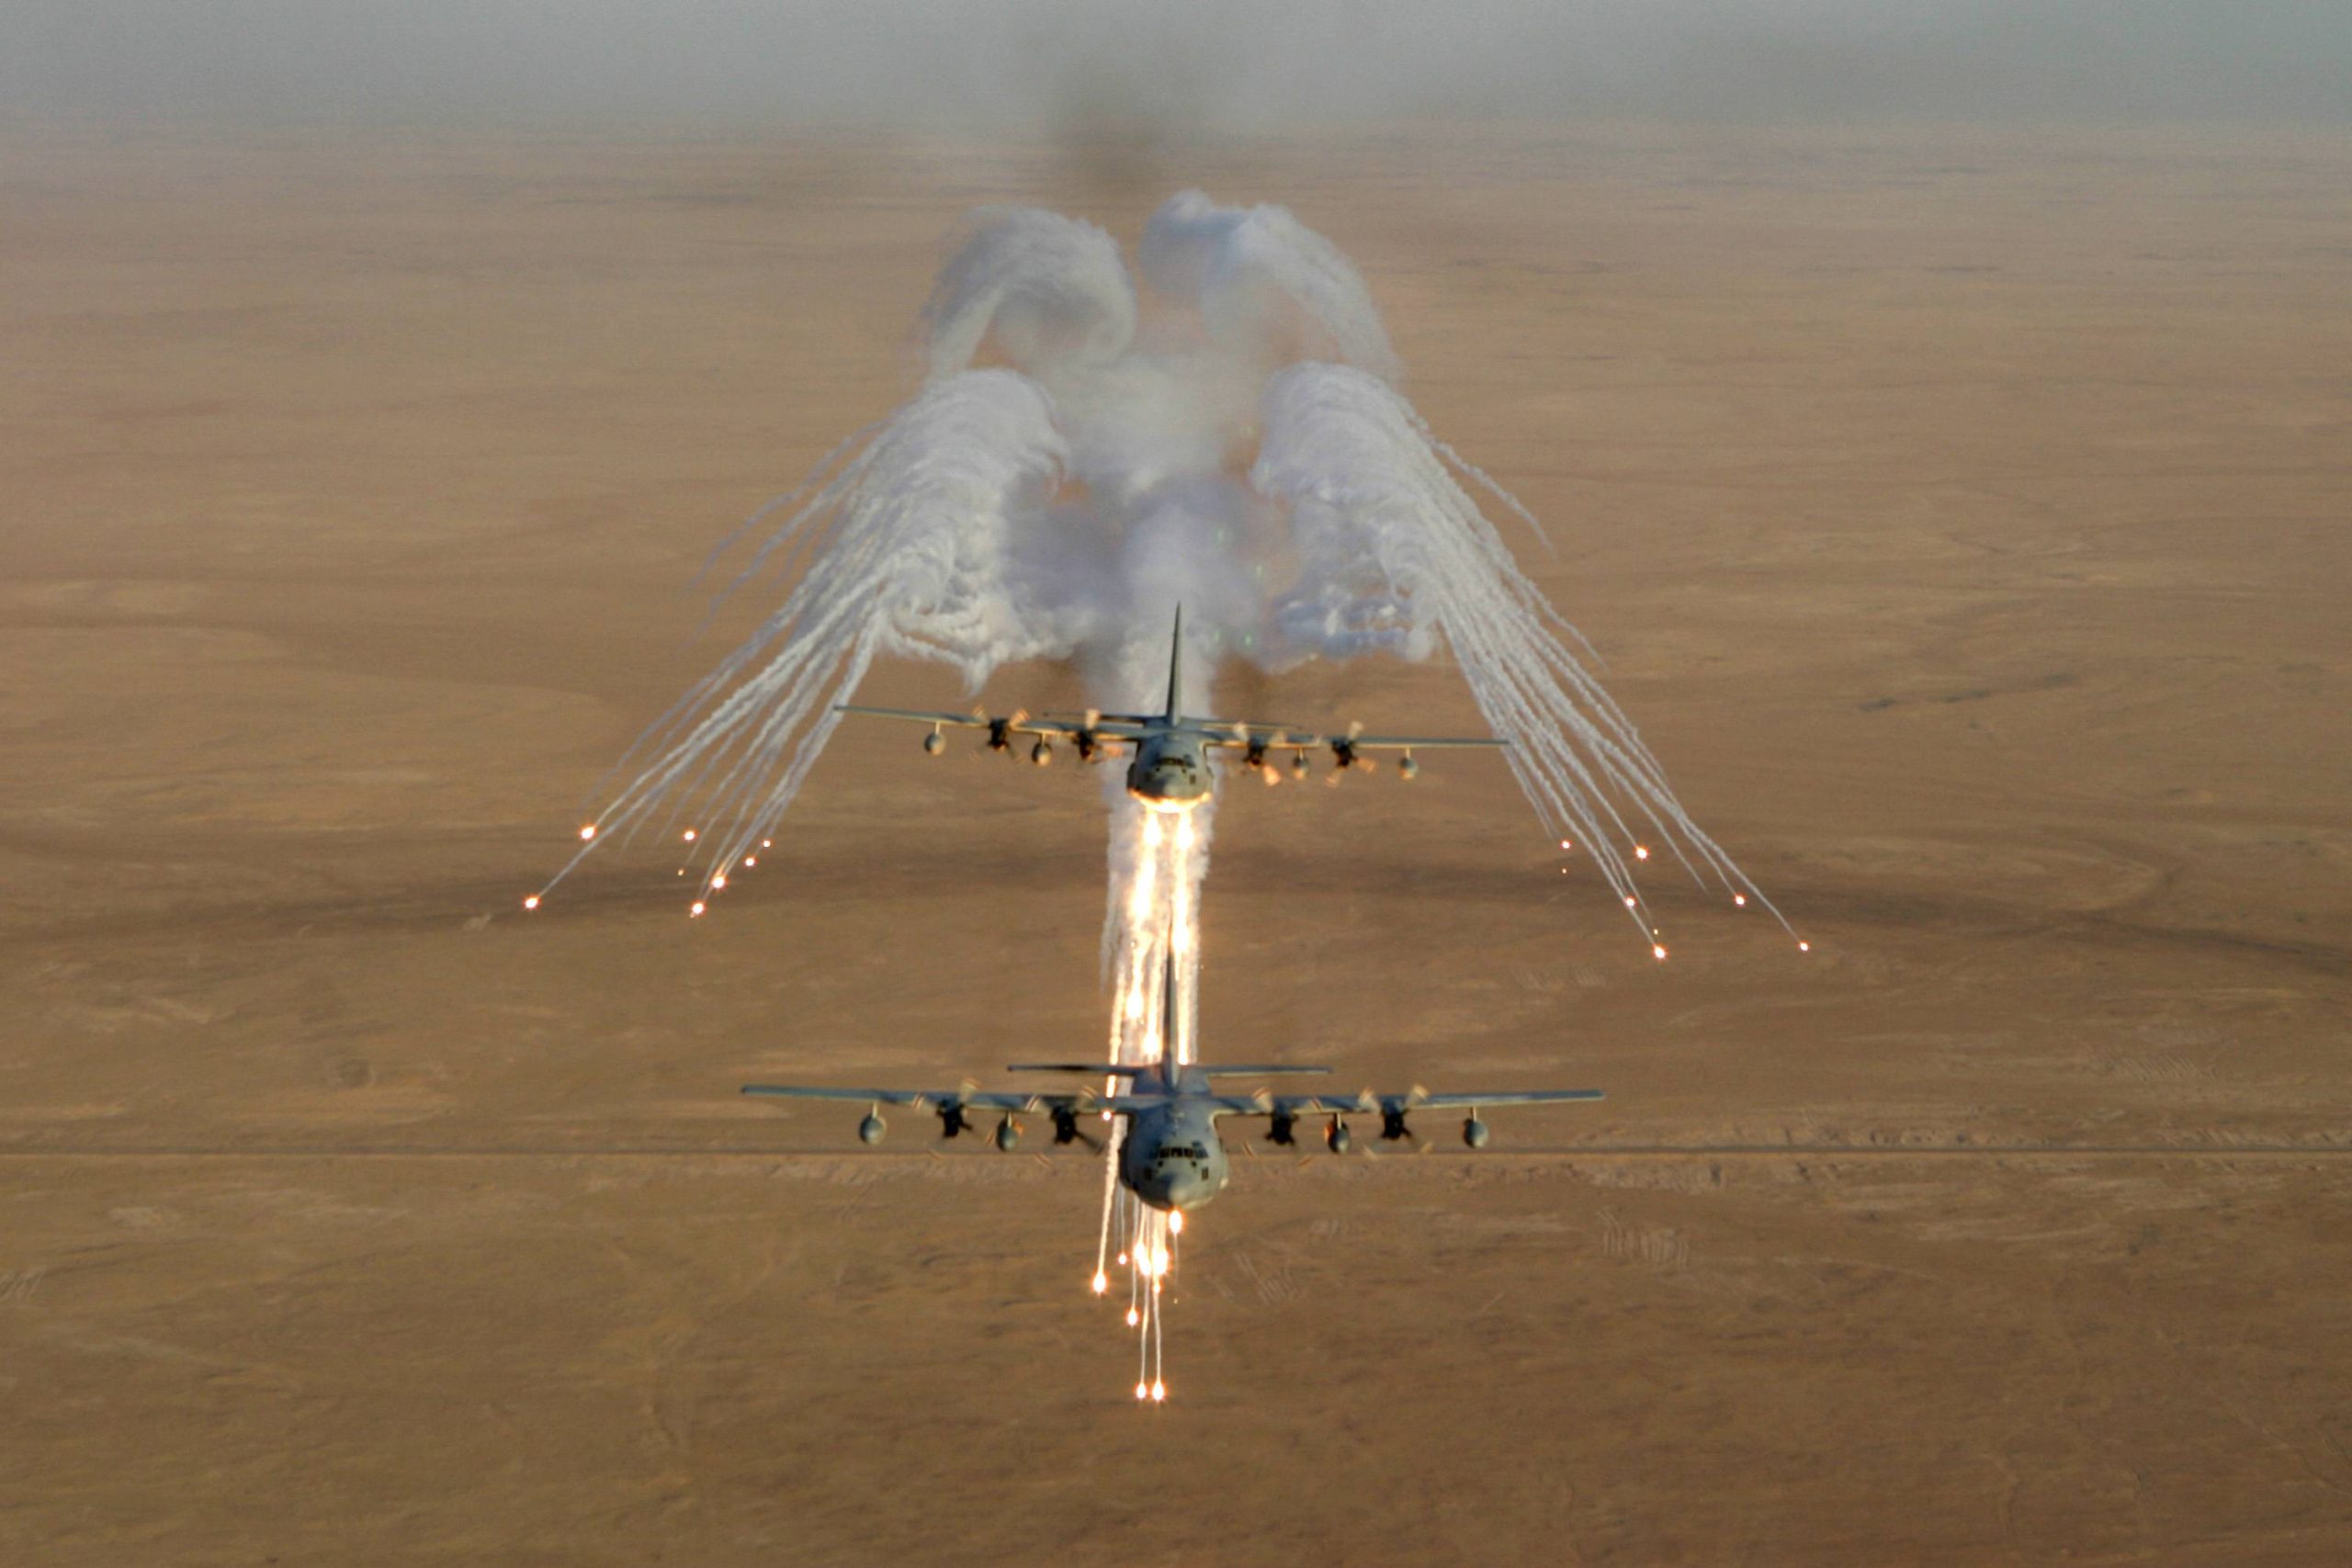 You are currently viewing Death Angel Wings Flares 130 ac130 military aircraft usmc marine ac corps desert hercules wallpapers angel kc 2003 death firing chamorrobible planes september